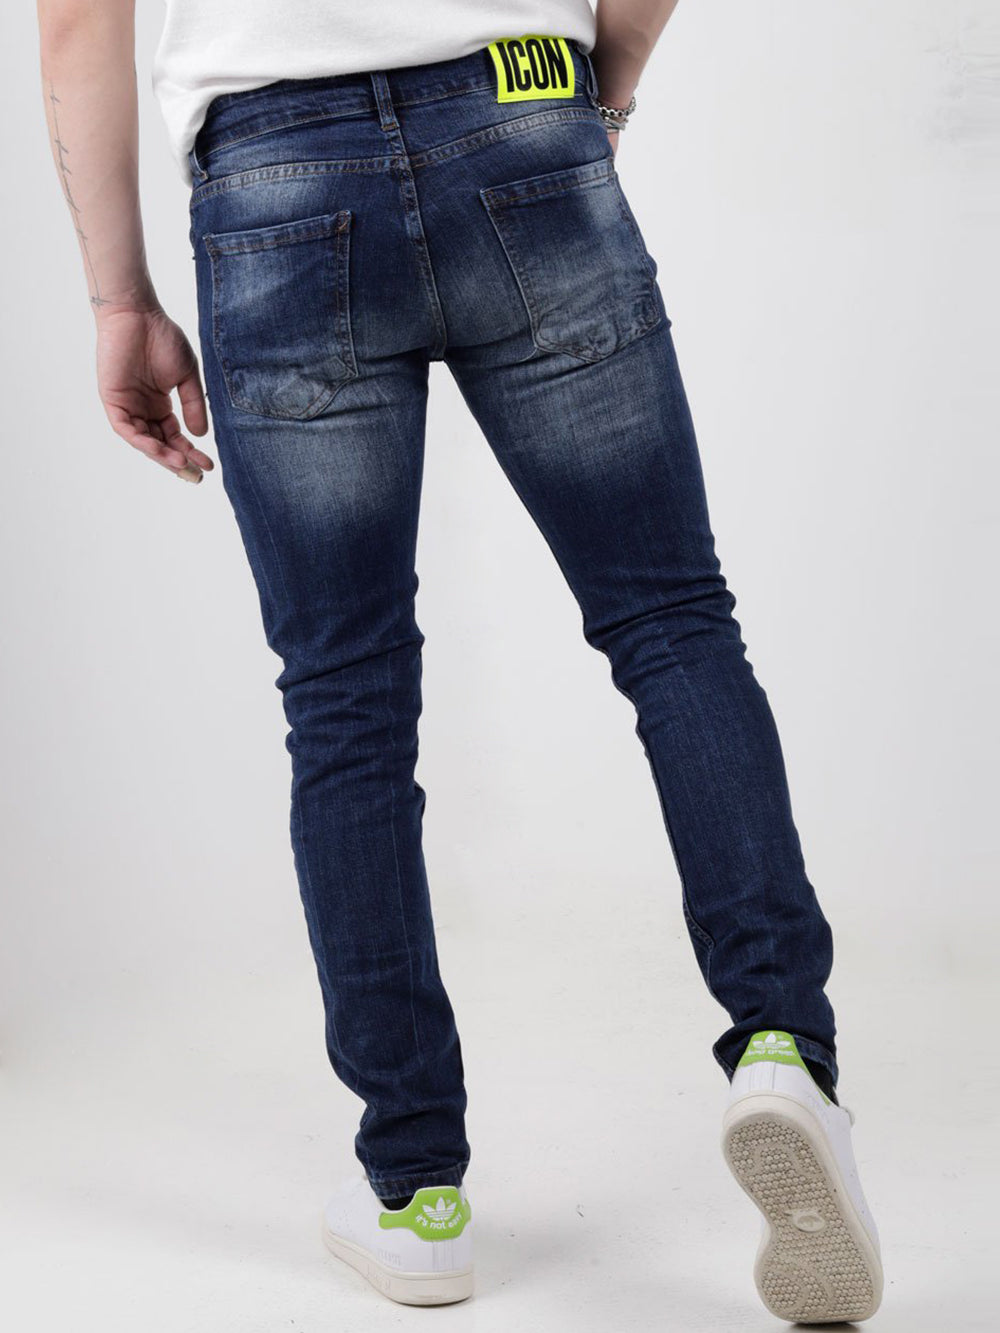 The back view of a man wearing GRAPHITE jeans.